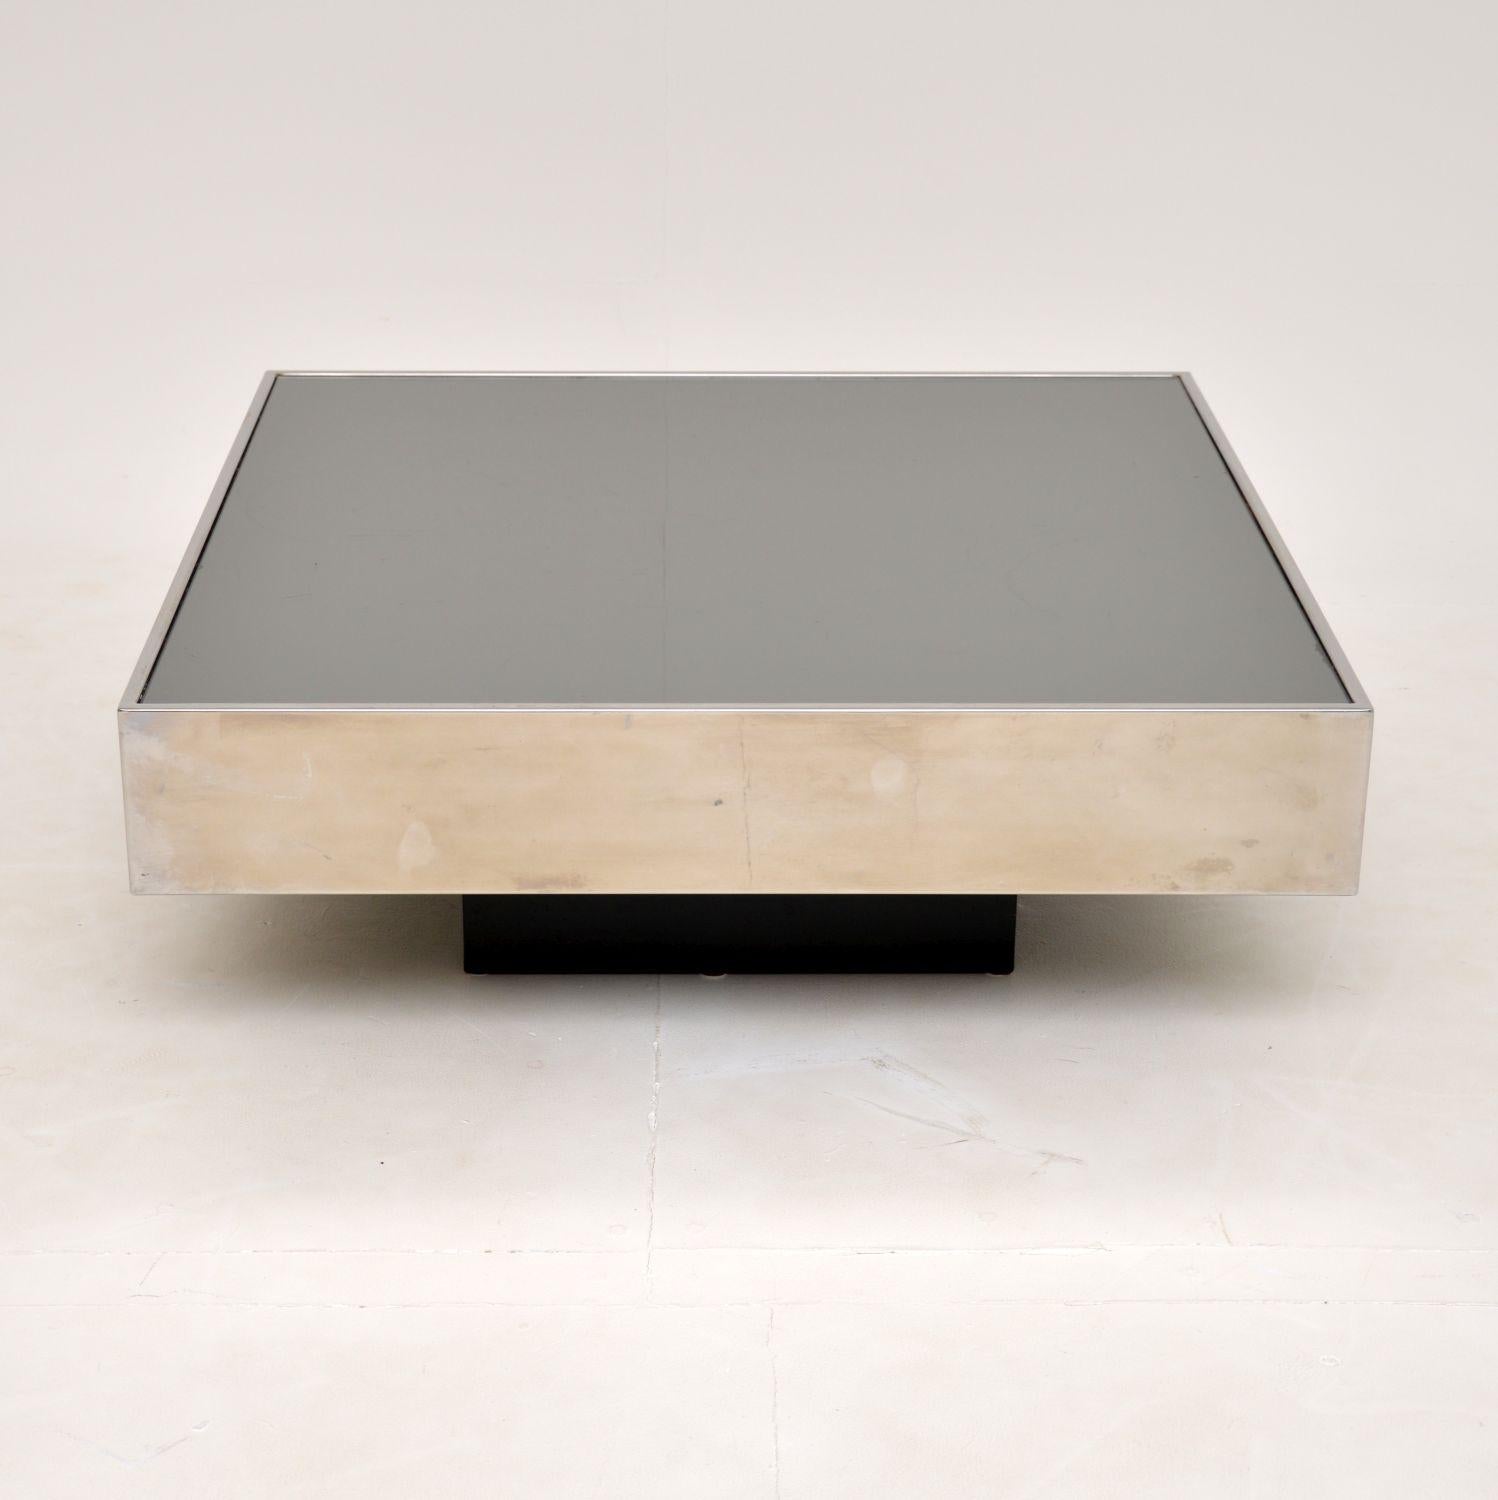 Late 20th Century 1970's Italian Retro Coffee Table by Willy Rizzo for Cidue